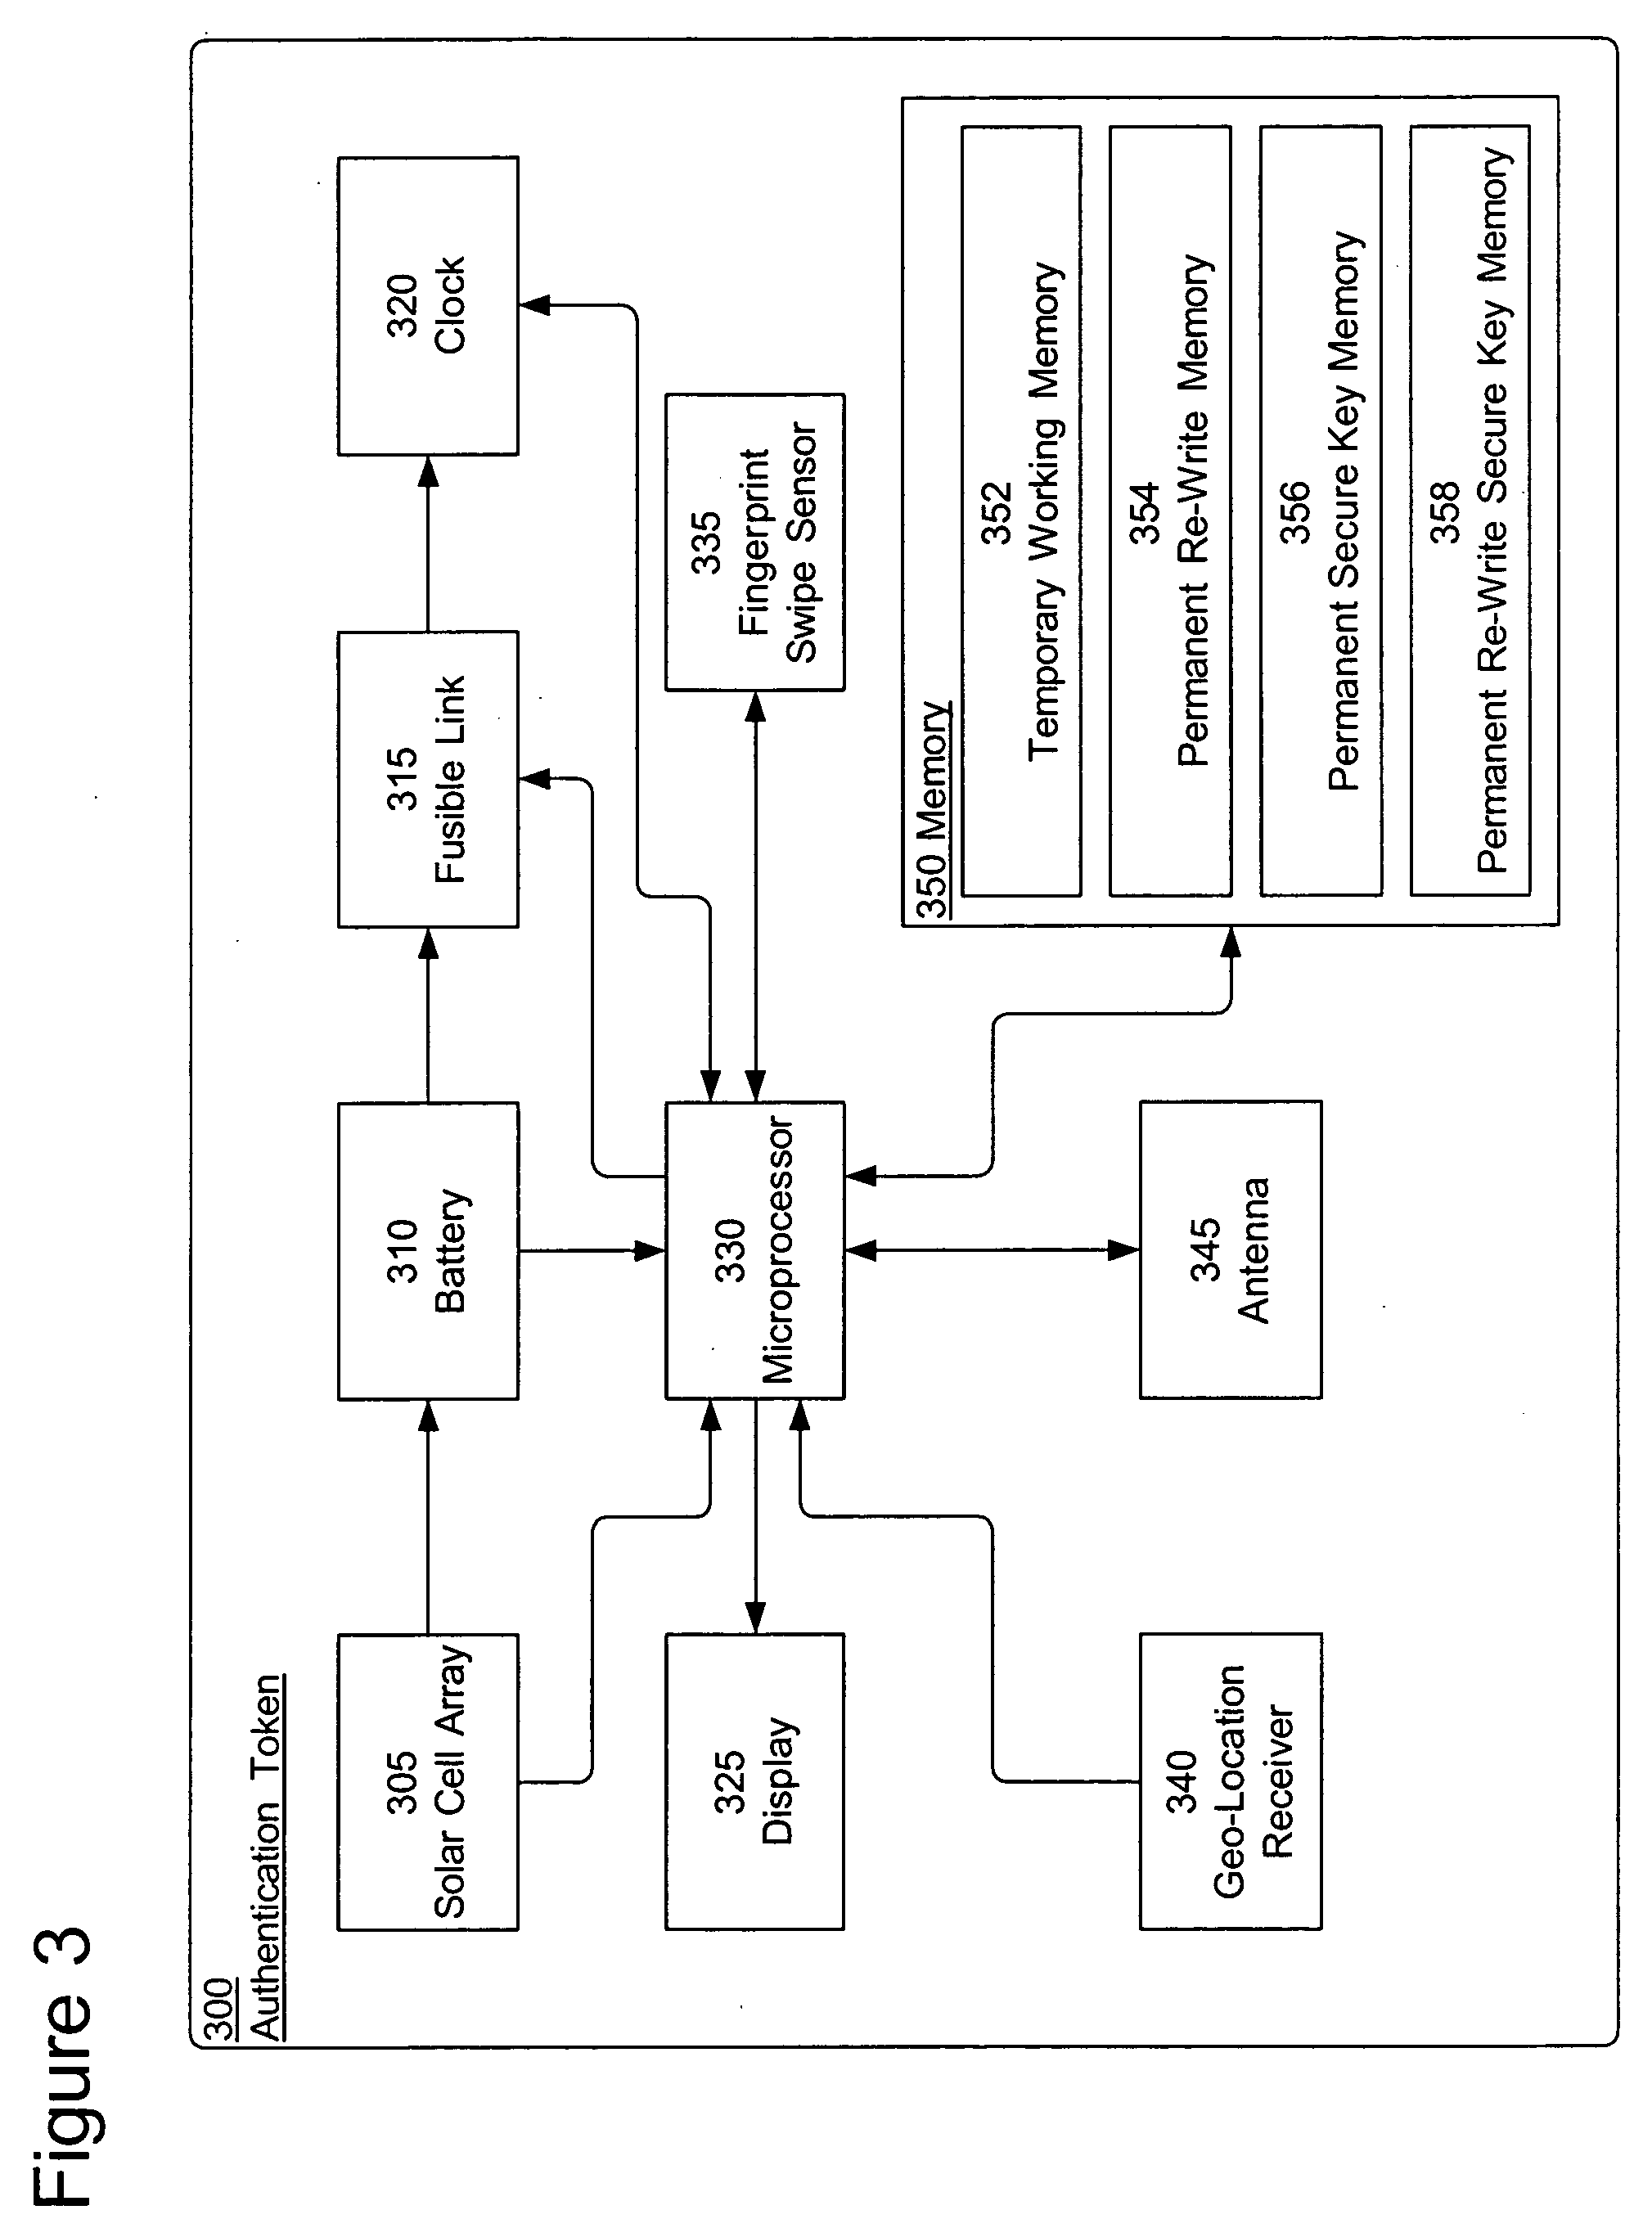 Multi-function solar cell in authentication token